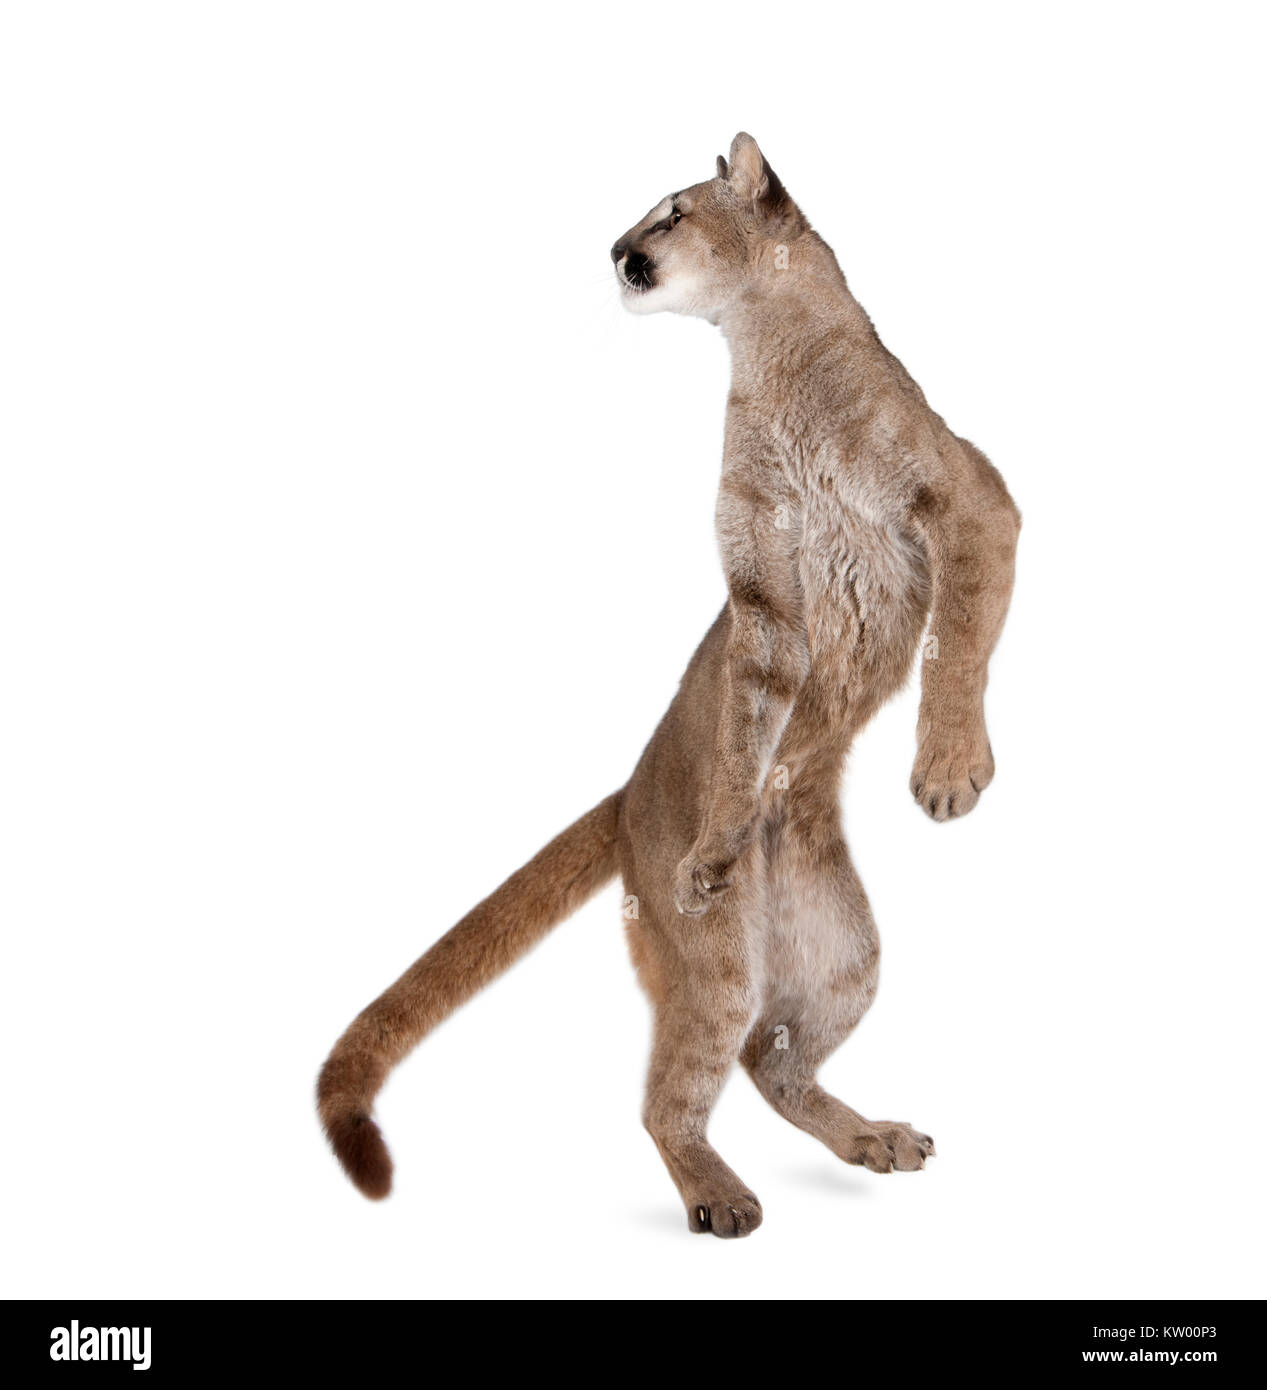 Puma cub, Puma concolor, 1 year old, standing on hind legs and looking back  against white background, studio shot Stock Photo - Alamy